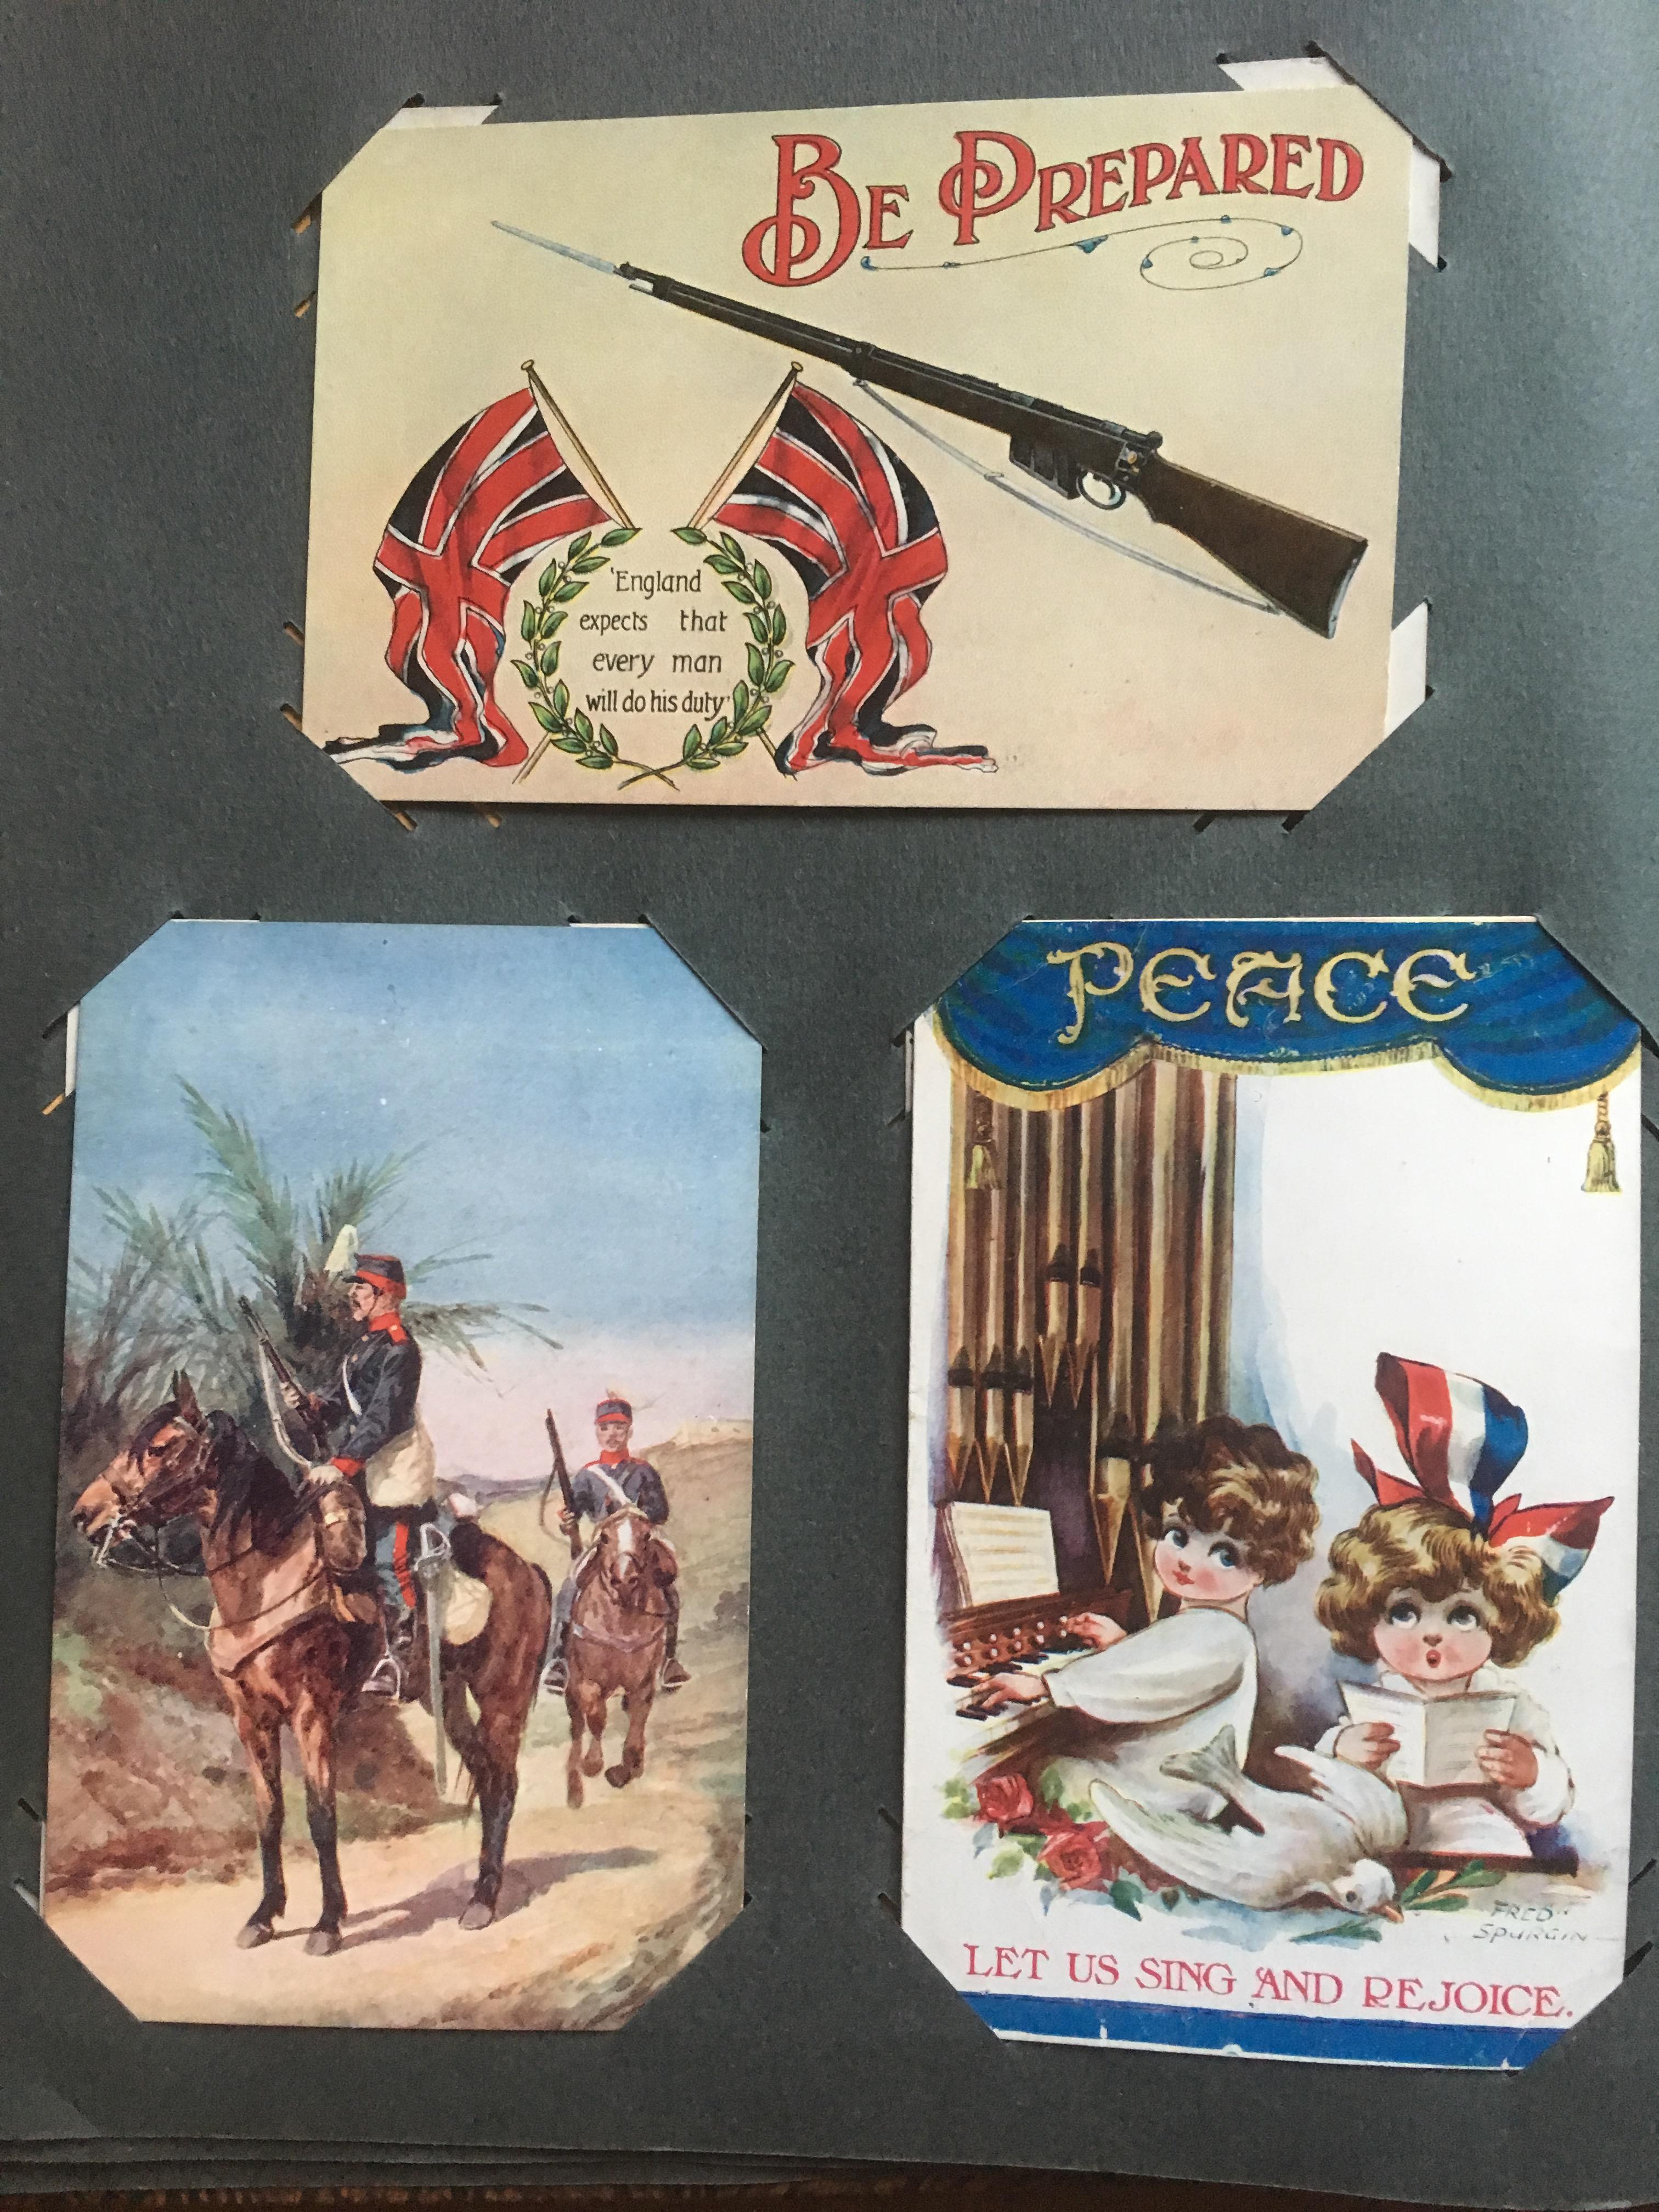 CORNER SLOT ALBUM OF MILITARY POSTCARDS, ARTISTS WITH HARRY PAYNE, MUCH WW1 WITH COMIC, SENTIMENT,